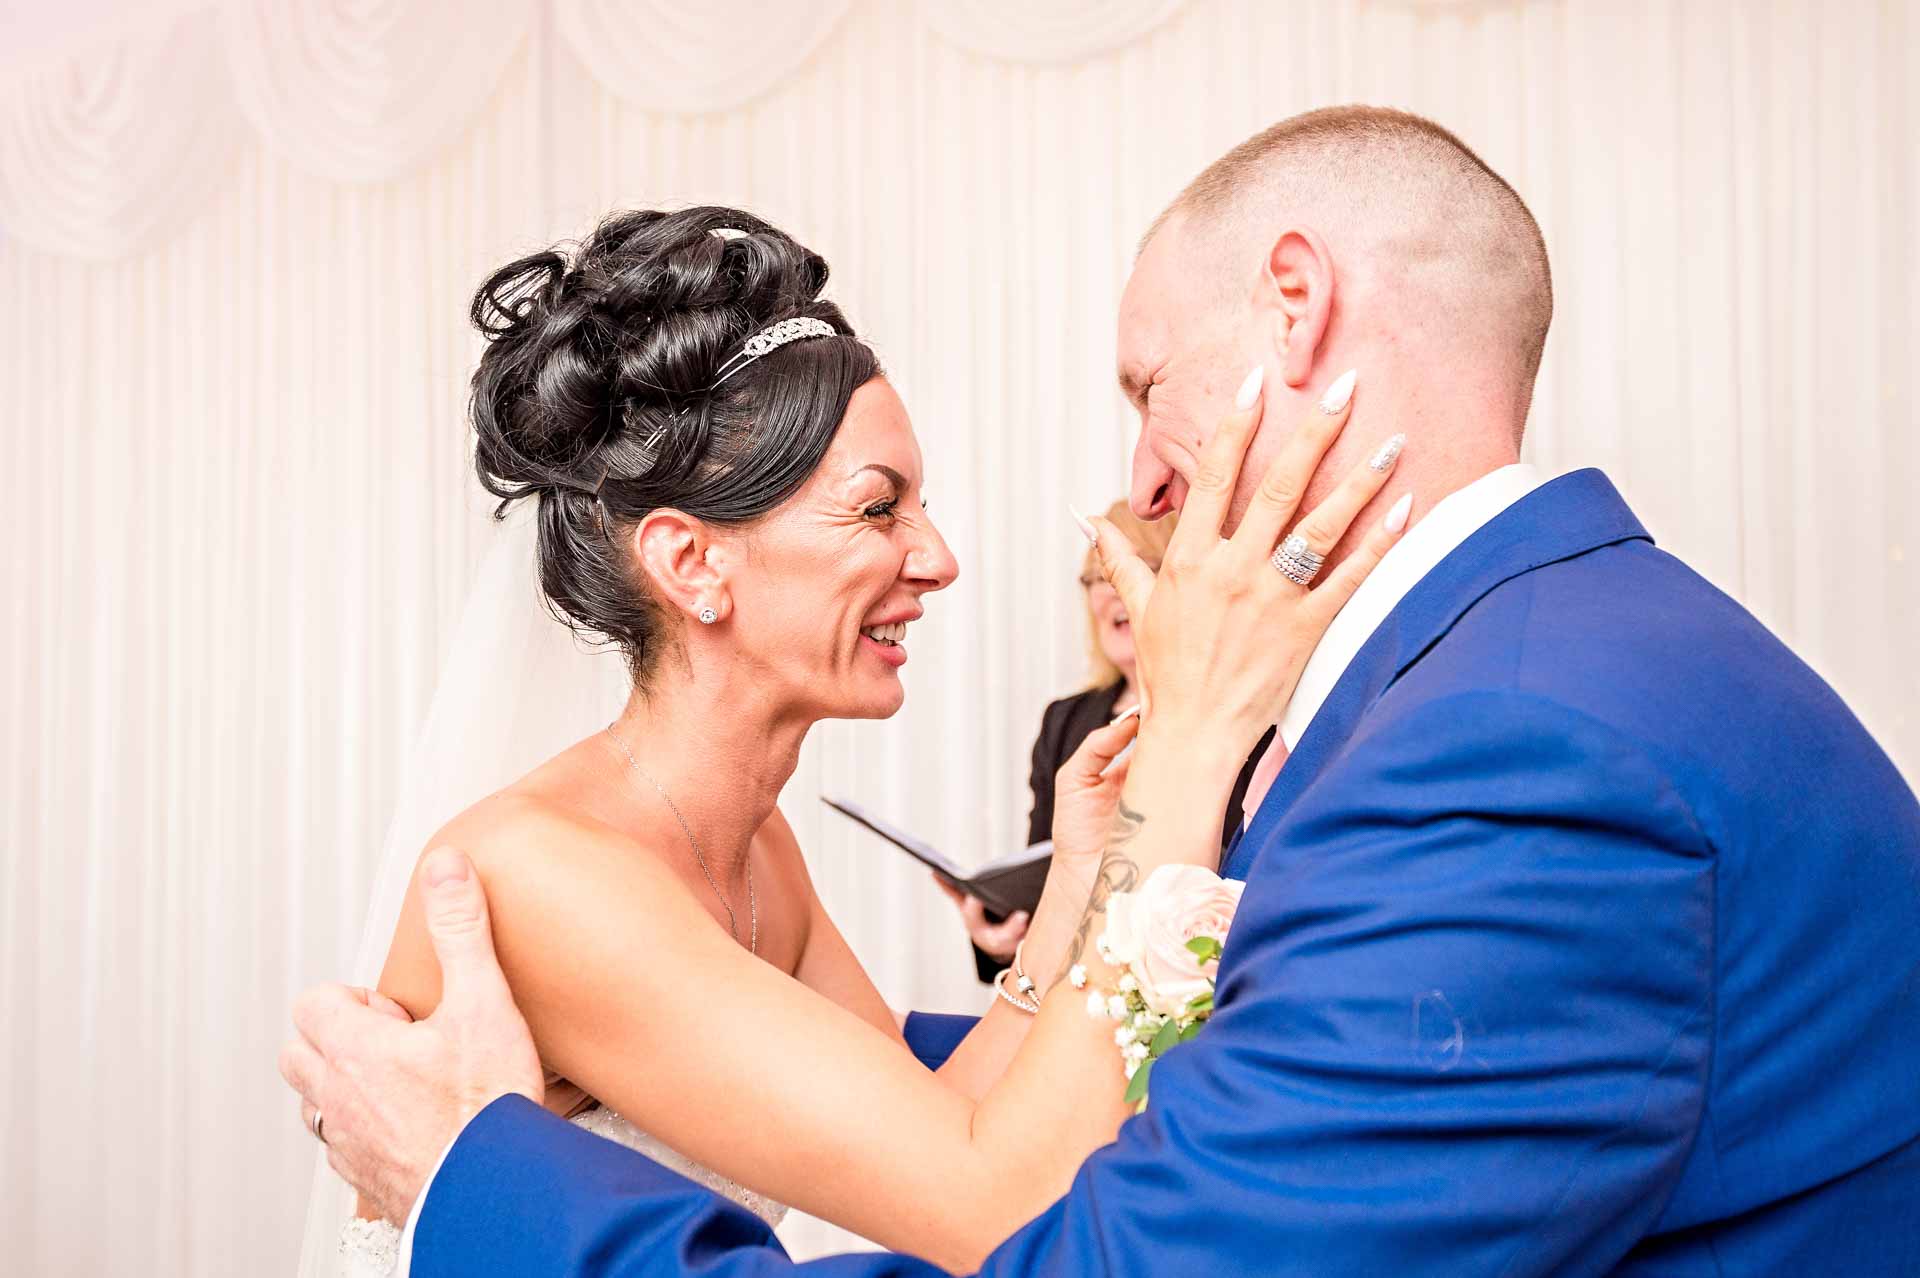 Bride laughing and holding groom's face at the end of the wedding ceremony